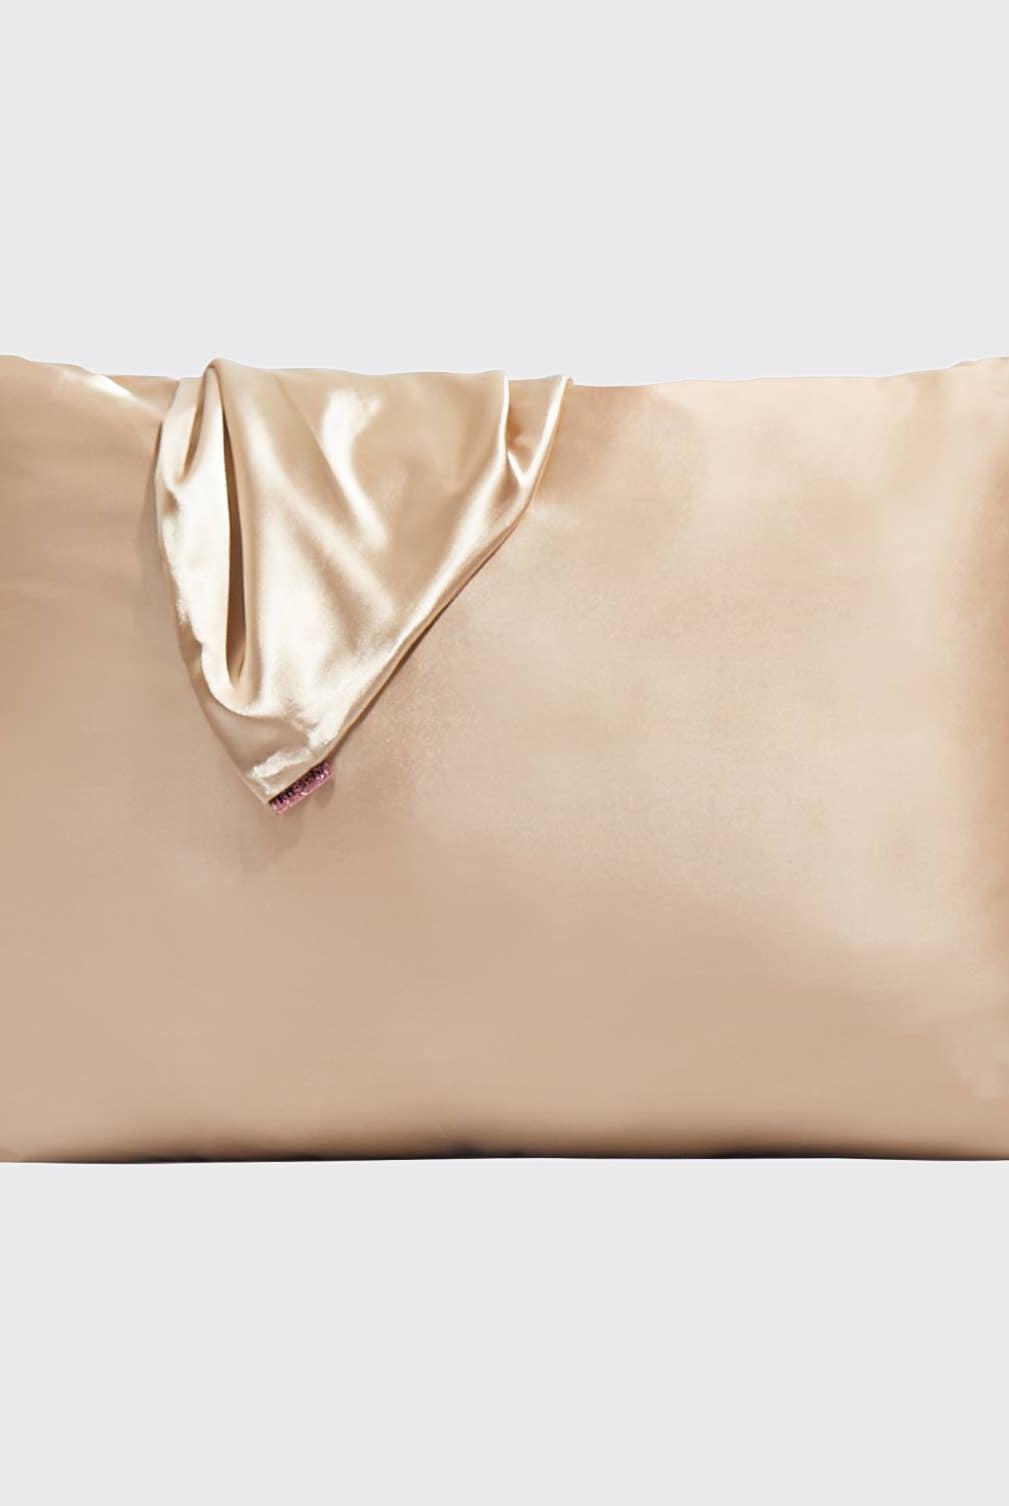 Satin Pillowcase - Champagne-Beauty-Vixen Collection, Day Spa and Women's Boutique Located in Seattle, Washington